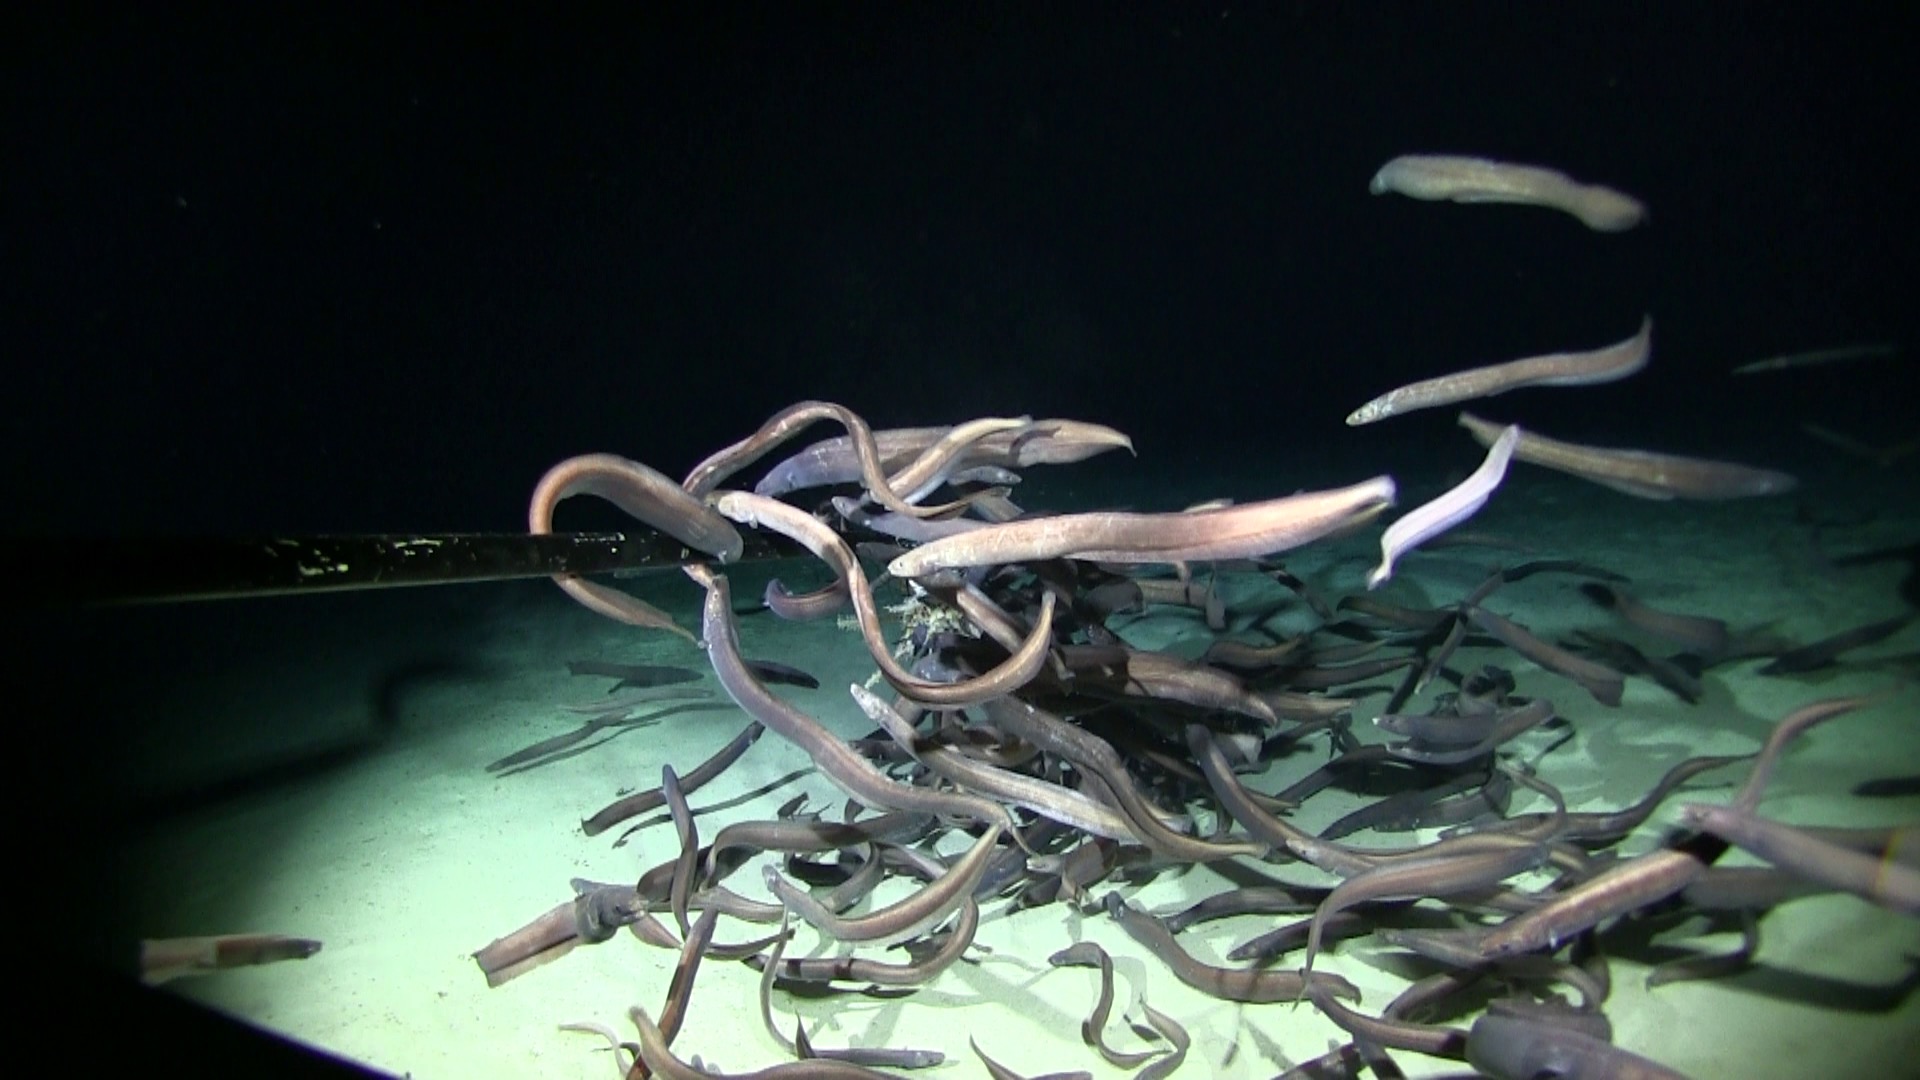 Cutthroat eels (Ilyophis arx, Family Synaphobranchidae) swarming at a small bait package deployed on the summit of an unnamed abyssal seamount in the southwestern Clarion Clipperton Zone at a depth of 3083 m.